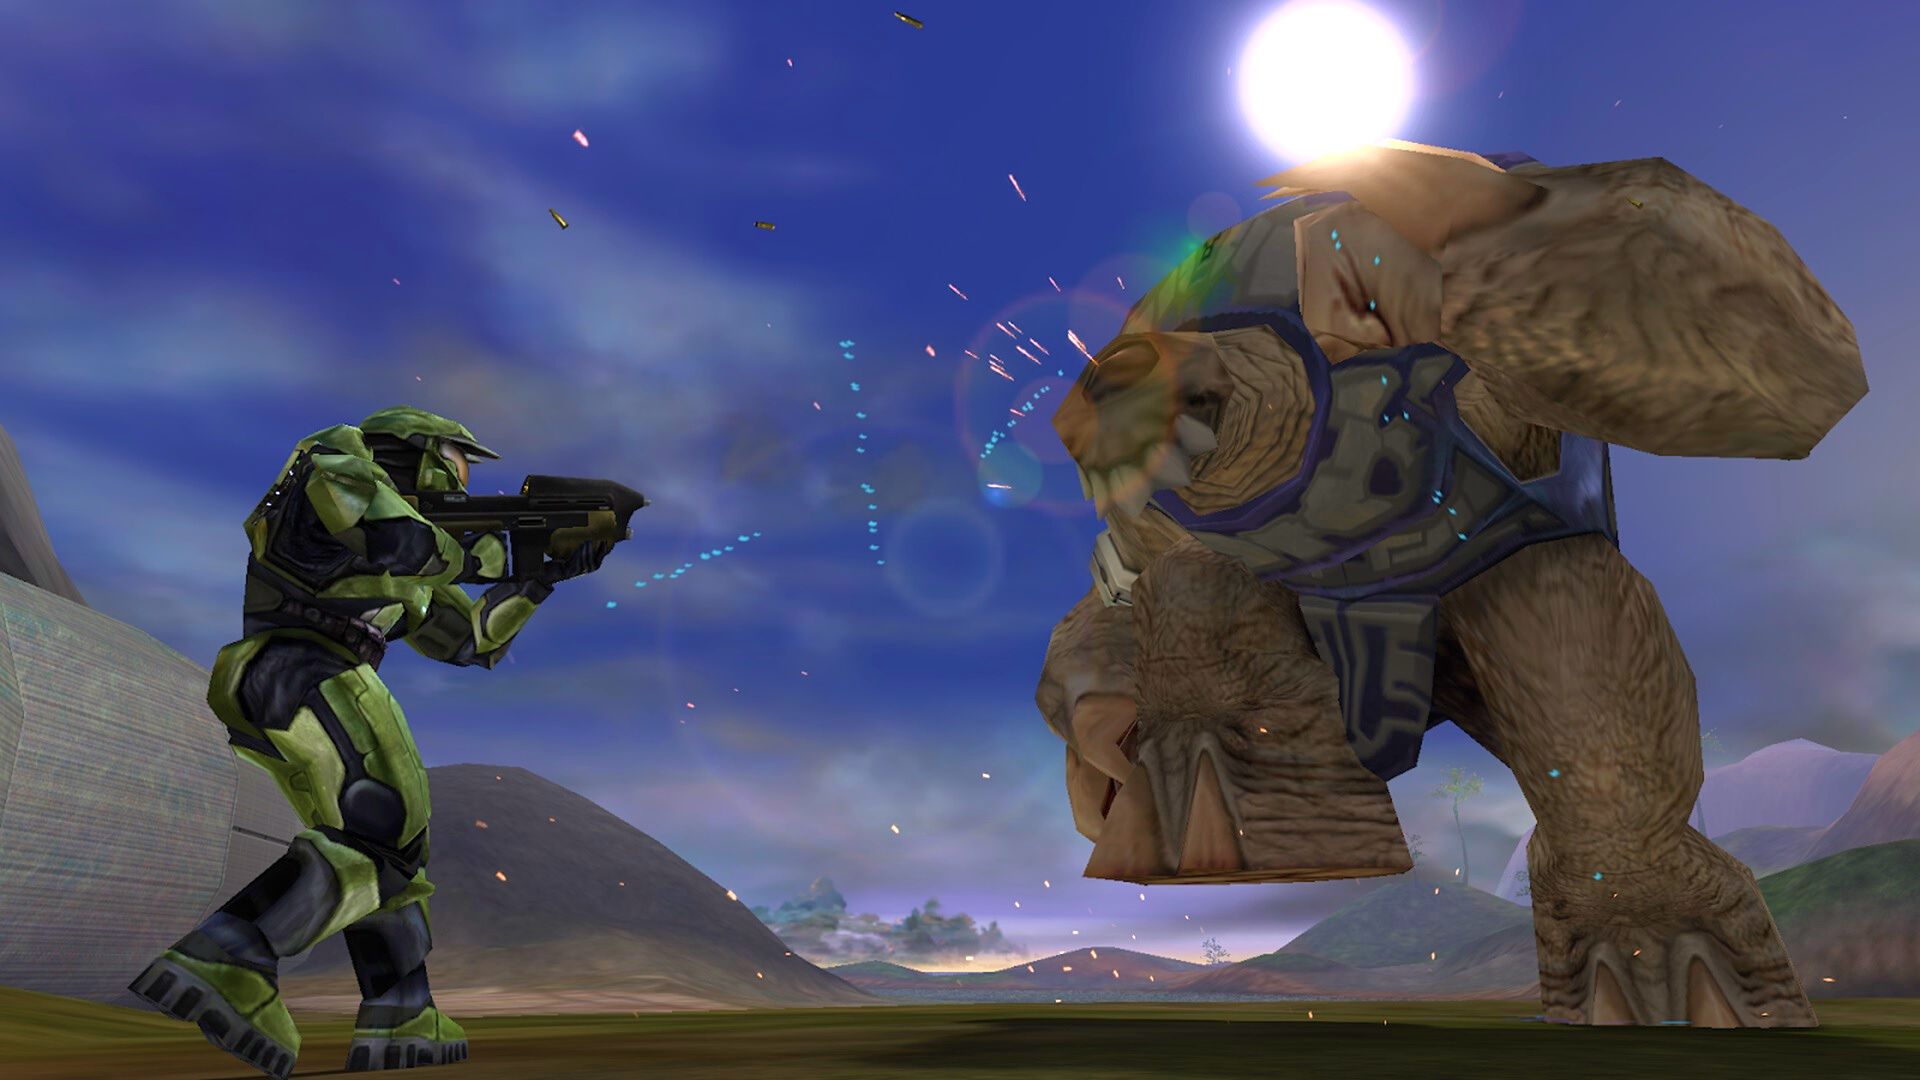 Halo's RTS and third-person roots are about to be restored